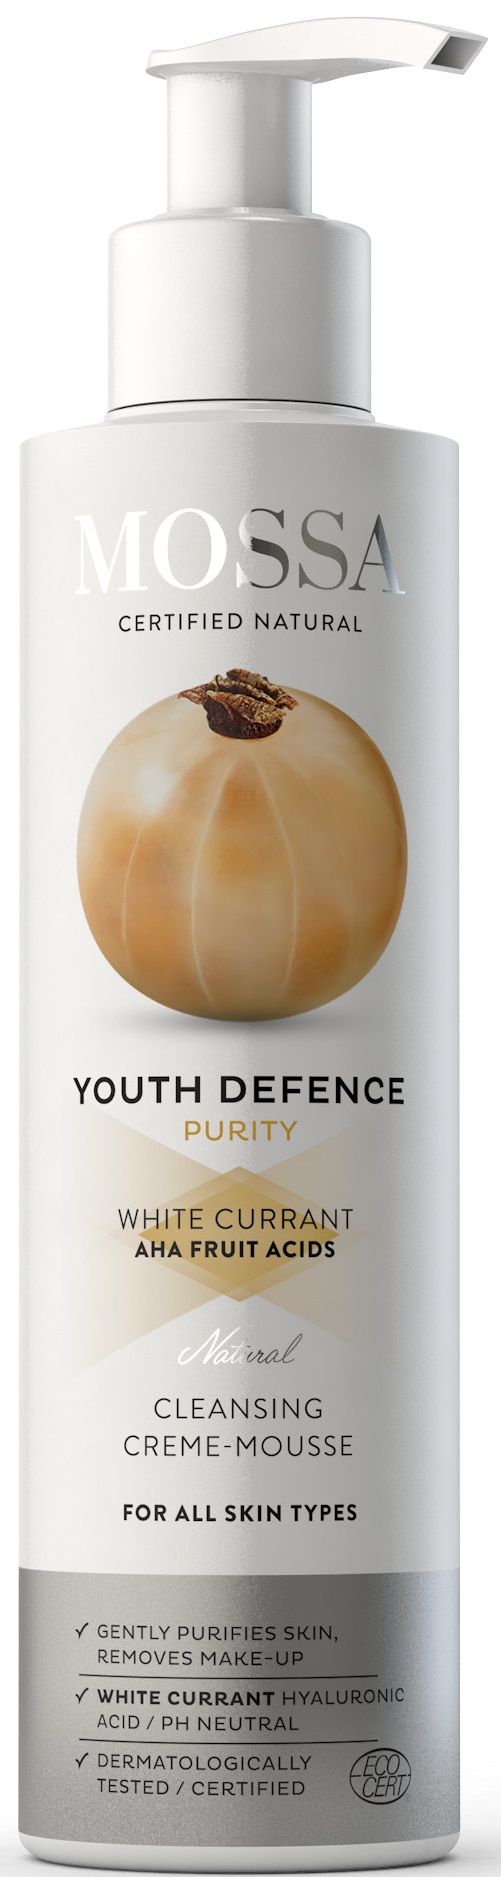 Mossa Youth Defence Cleansing Creme-Mousse